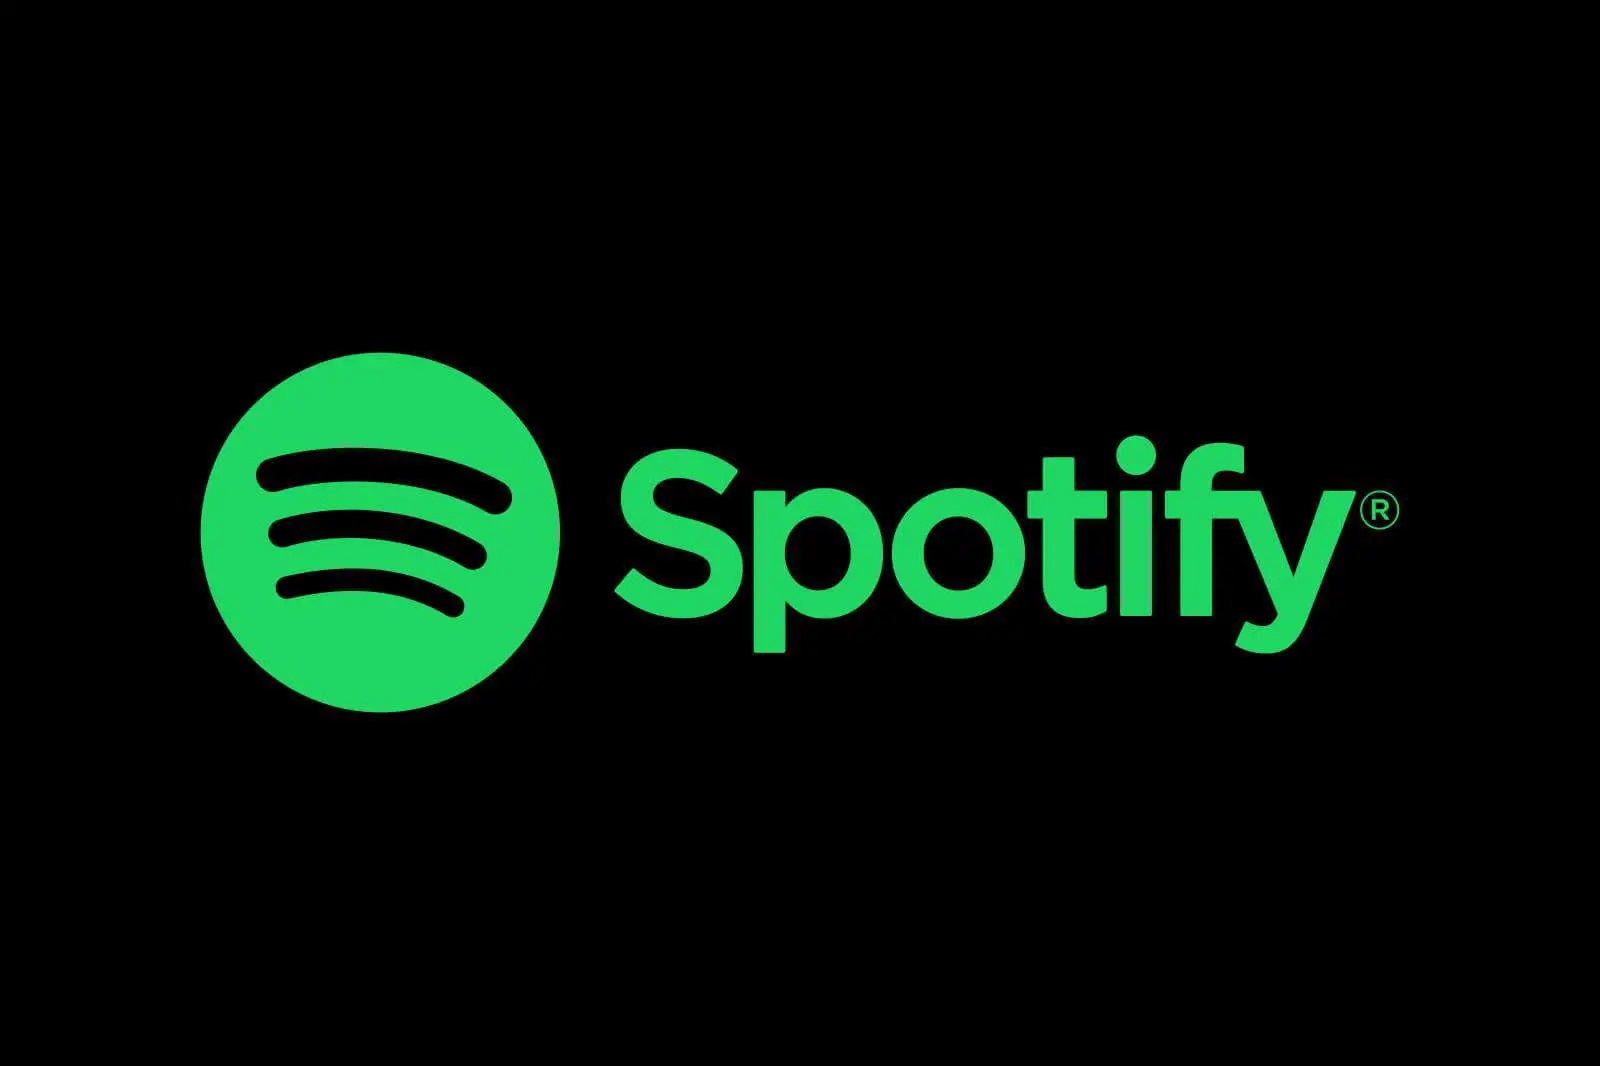 Spotify Announces Royalty Model Changes To Benefit Artists With $1 Billion Over Five Years